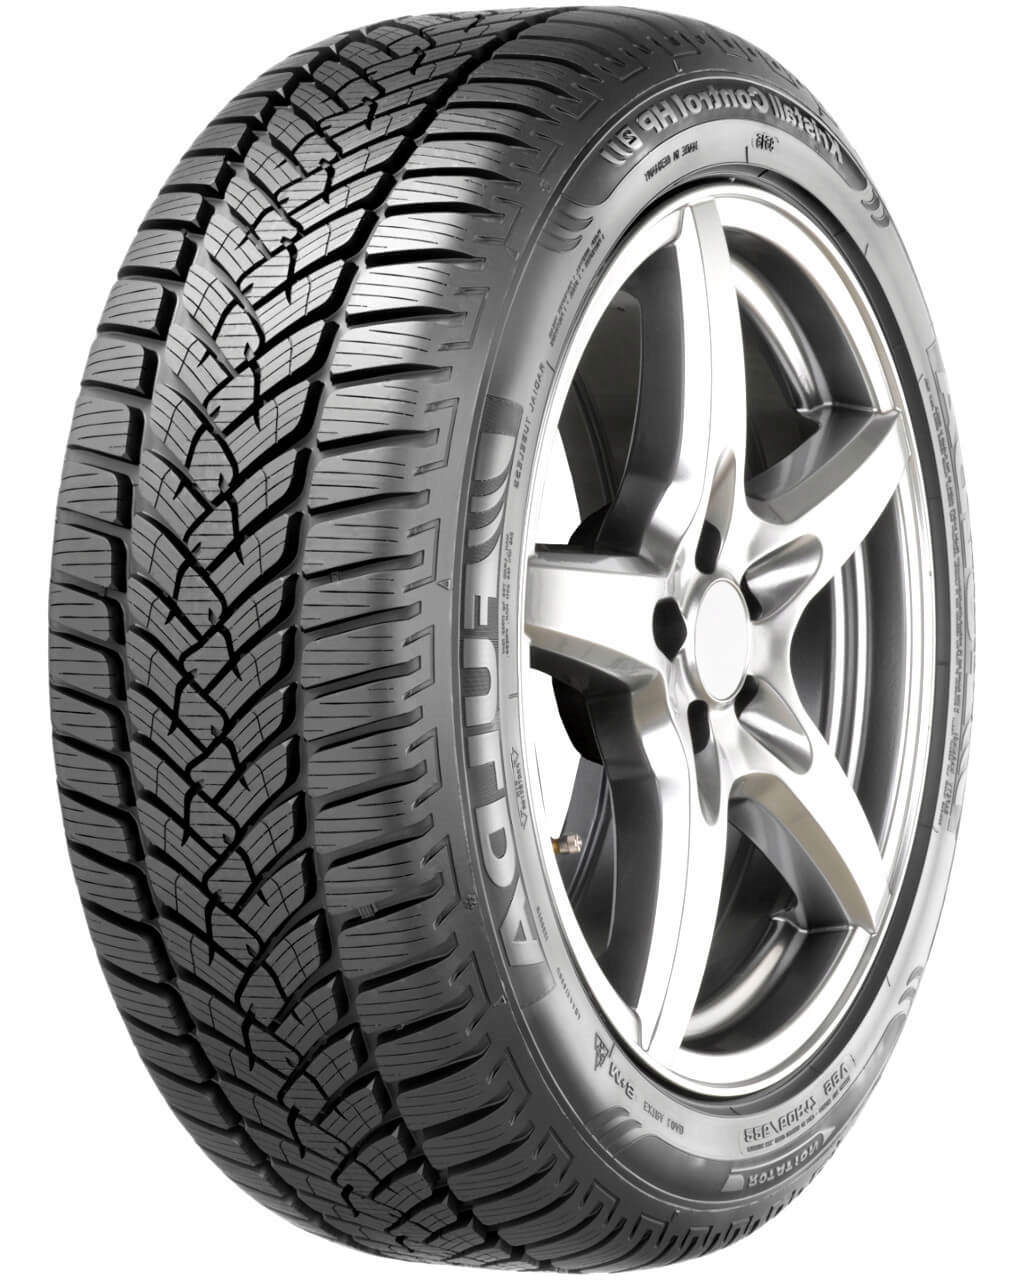 Gomme Nuove Fulda 195/50 R16 88H Kristall Control HP 2 FP XL M+S pneumatici nuovi Invernale